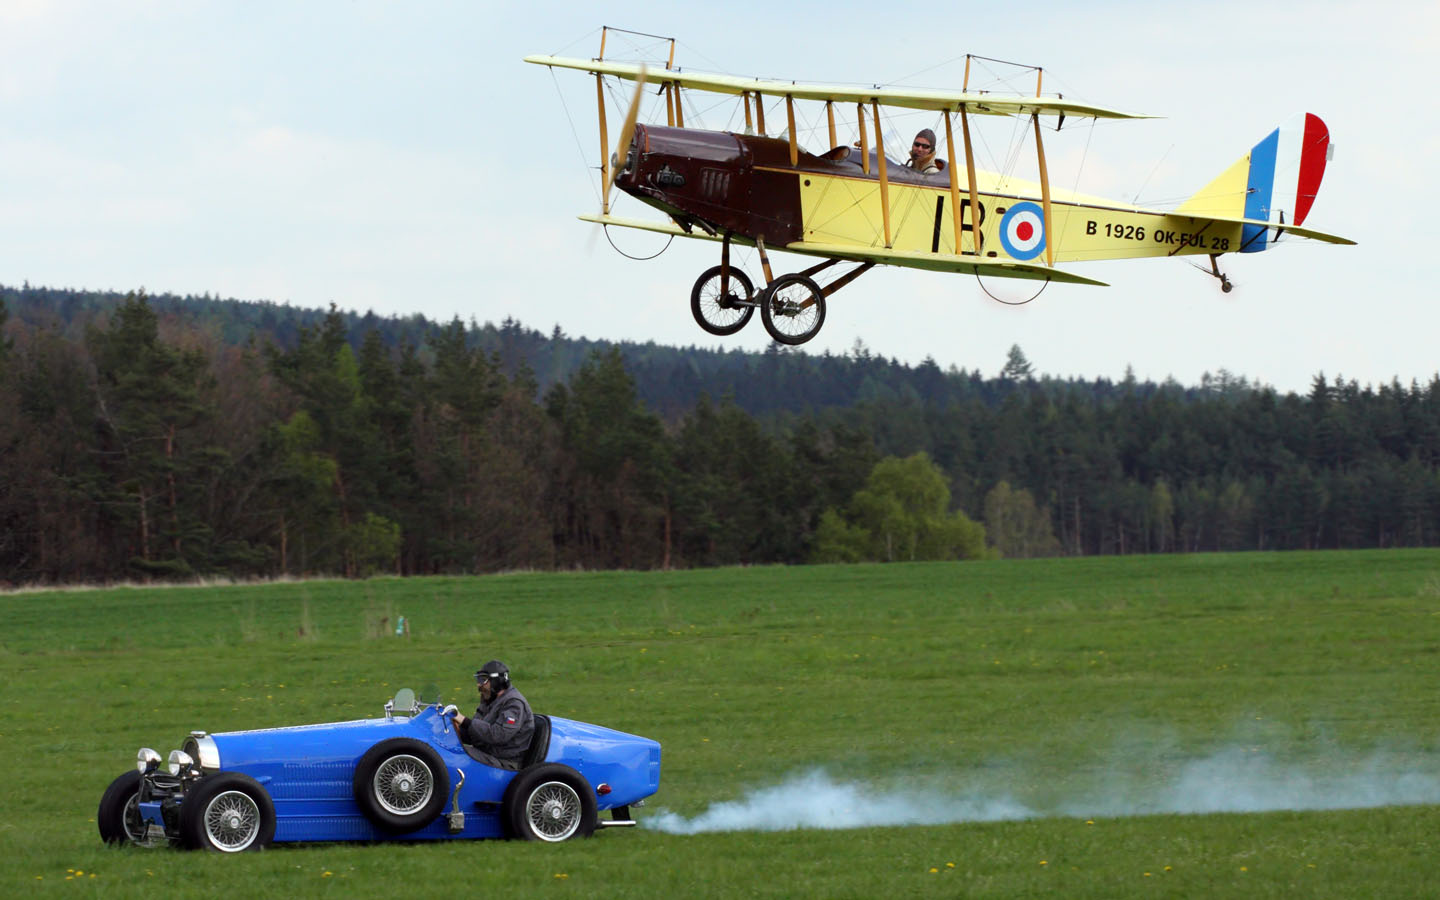 bugatti has produced airplanes along with cars in the past. it is among the many interesting bugatti fact 